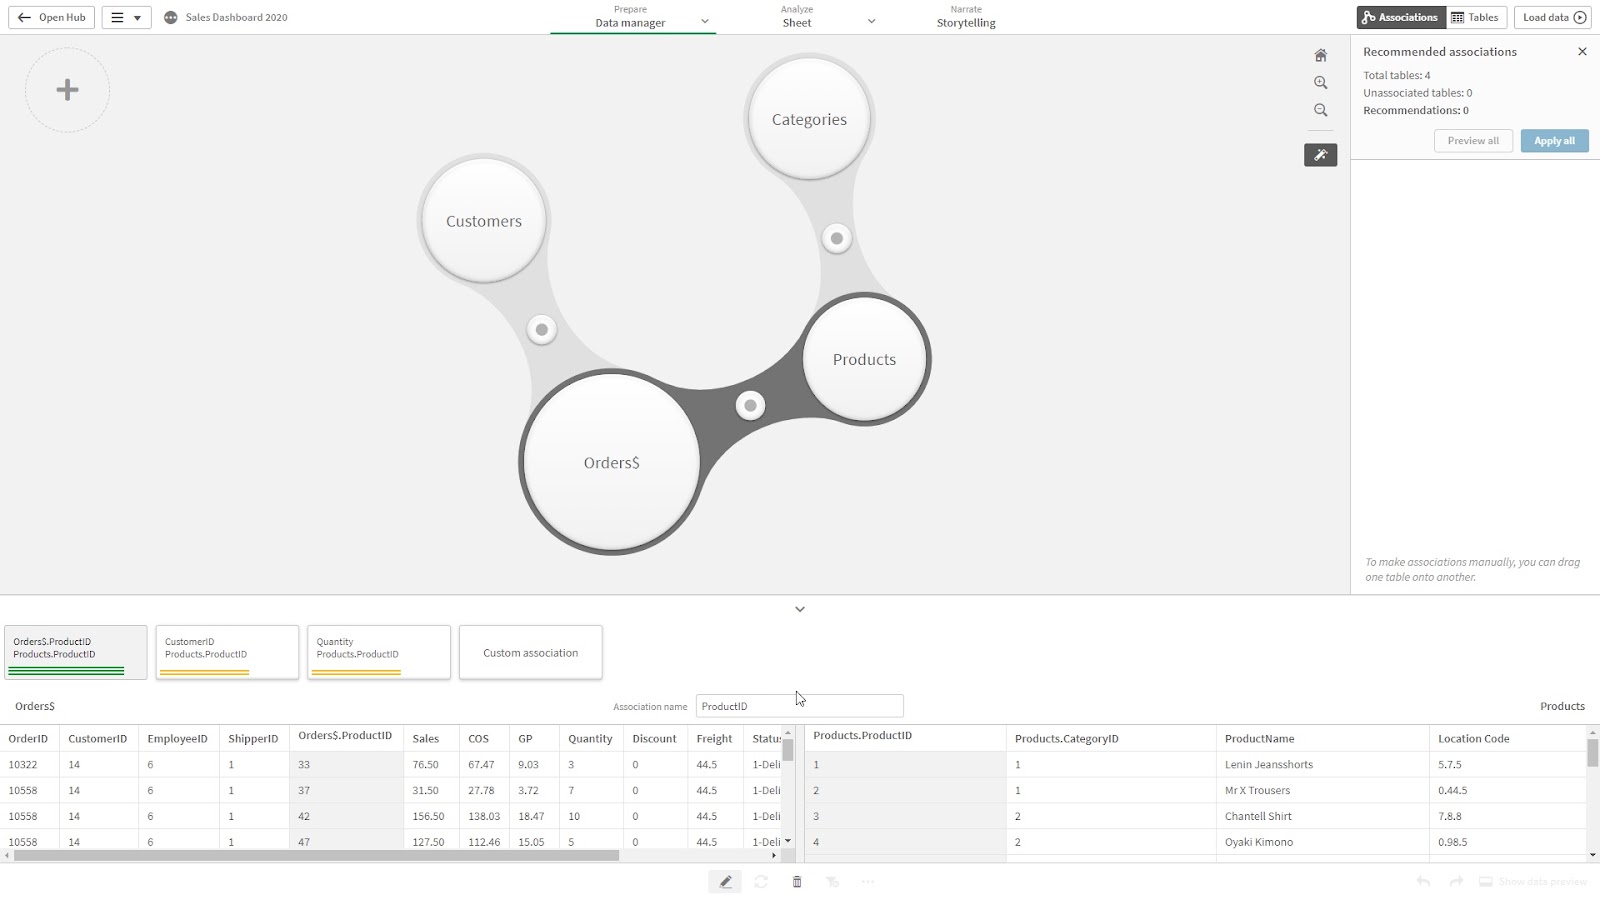 Qlik’s AI association engine showing connections between different data points like customers, categories, orders & products.